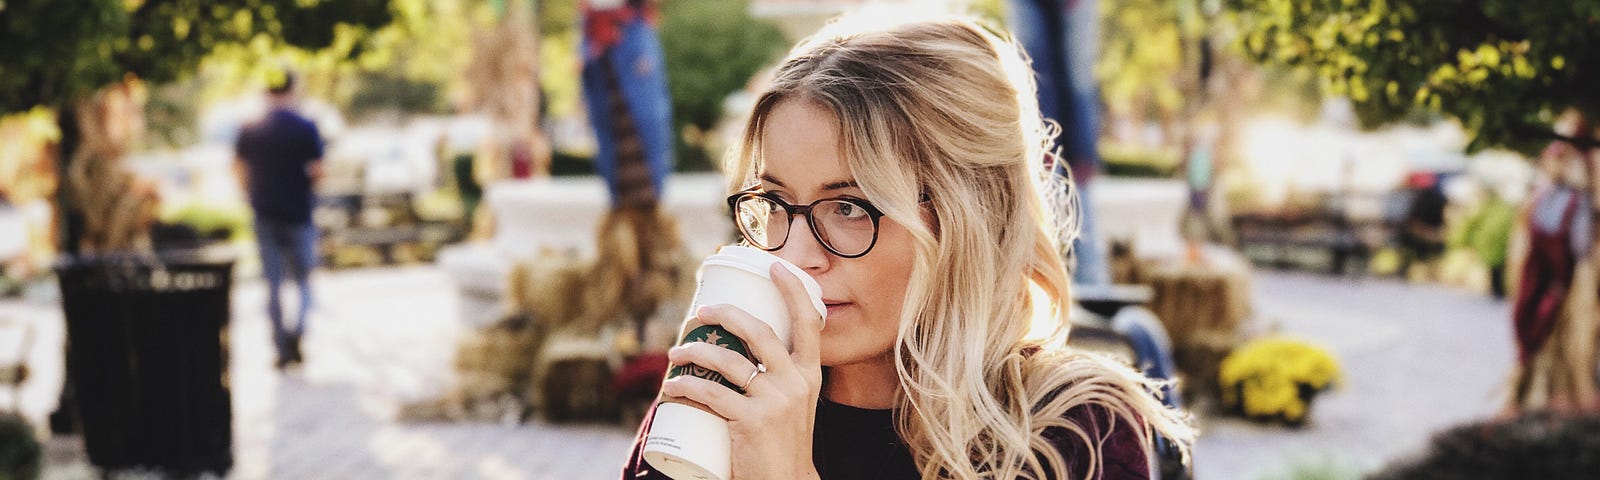 Blonde woman with eyeglasses sipping coffee while walking along a park